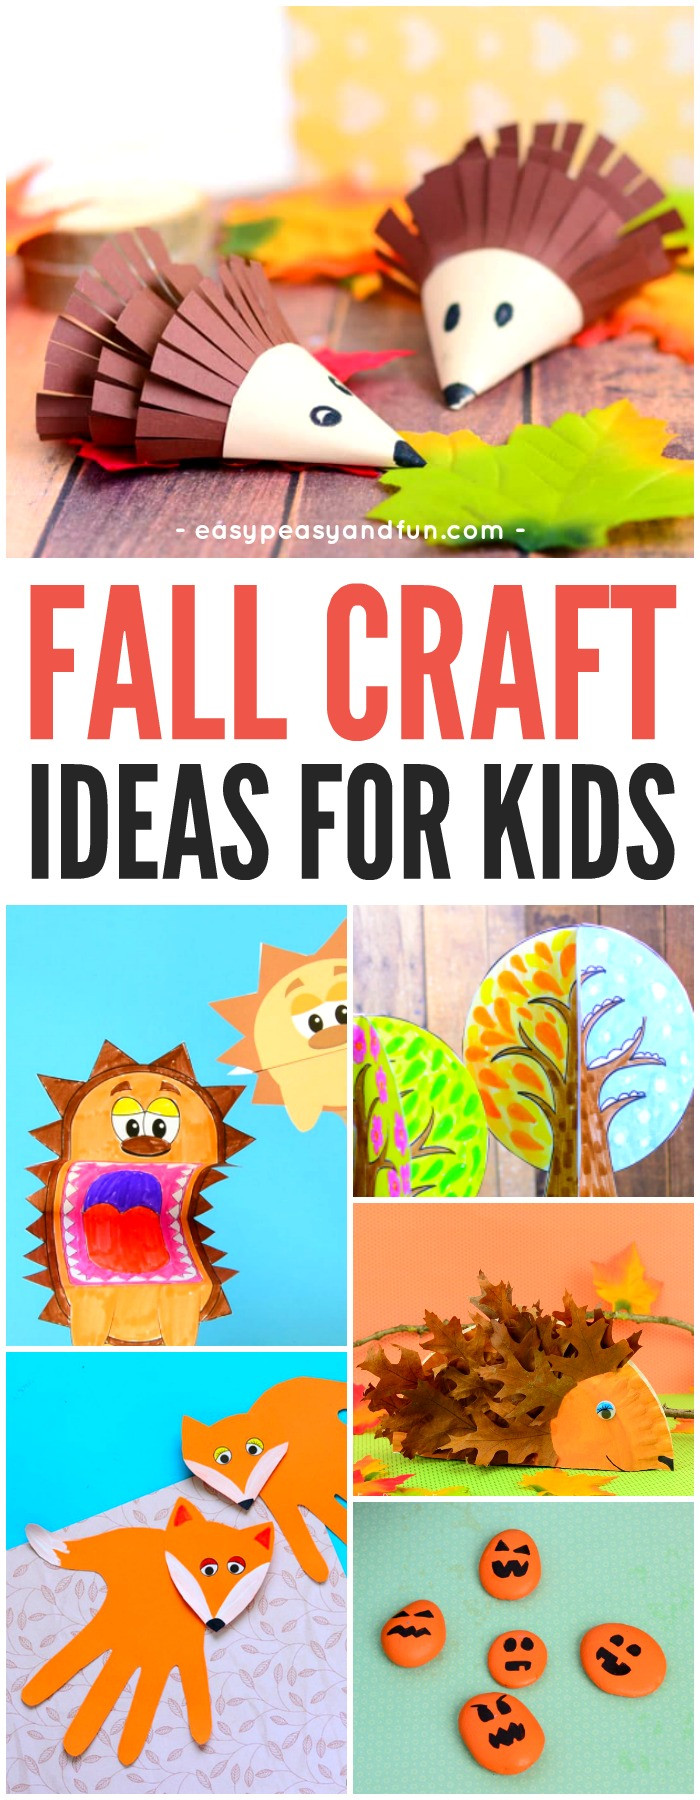 Fall Craft Idea For Kids
 Fall Crafts For Kids Art and Craft Ideas Easy Peasy